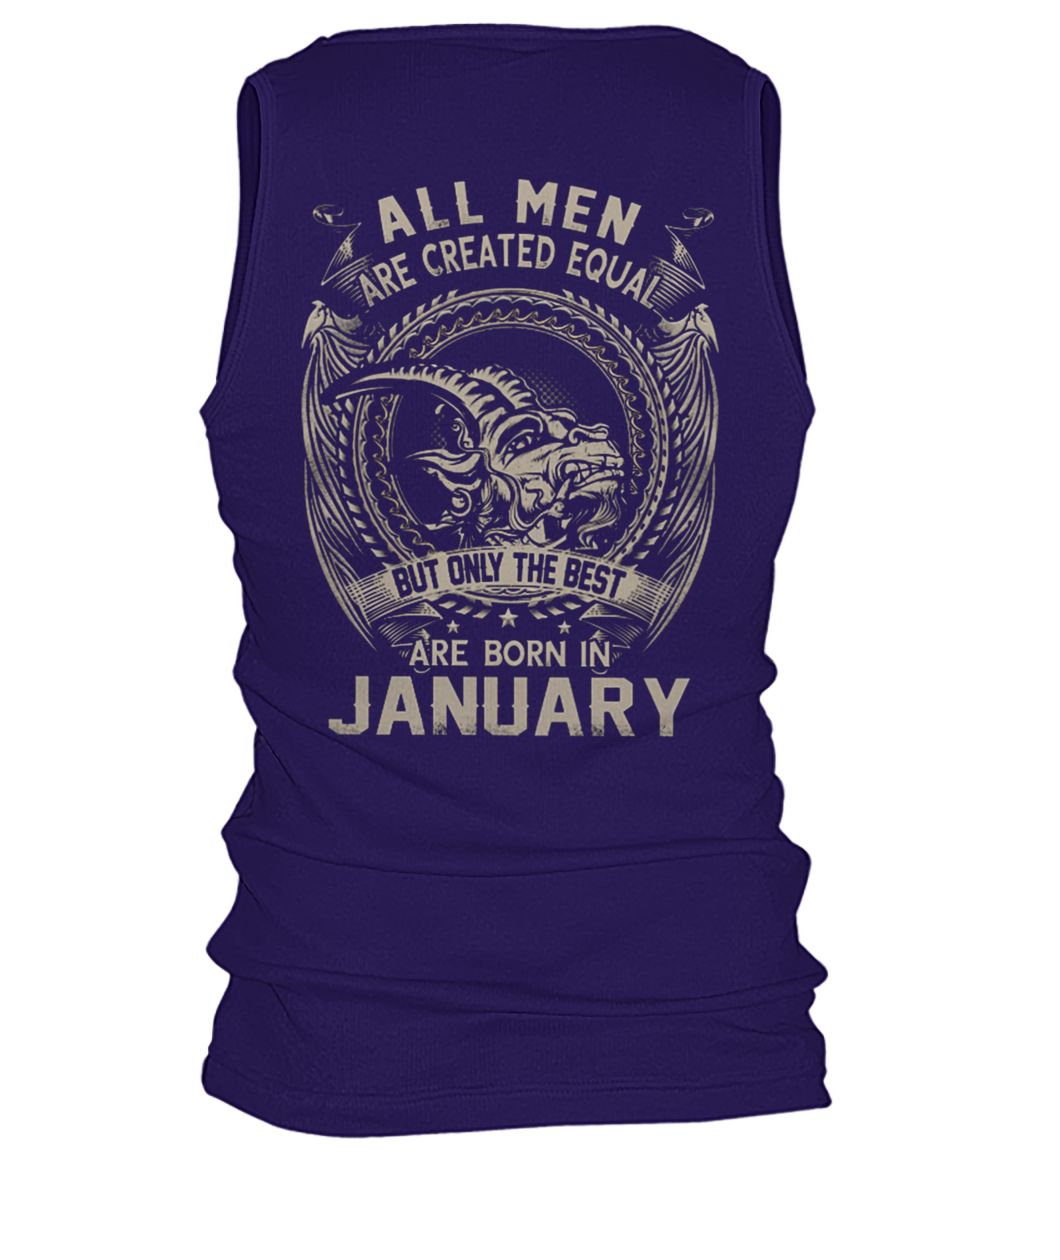 All men created equal but the best are born in january men's tank top